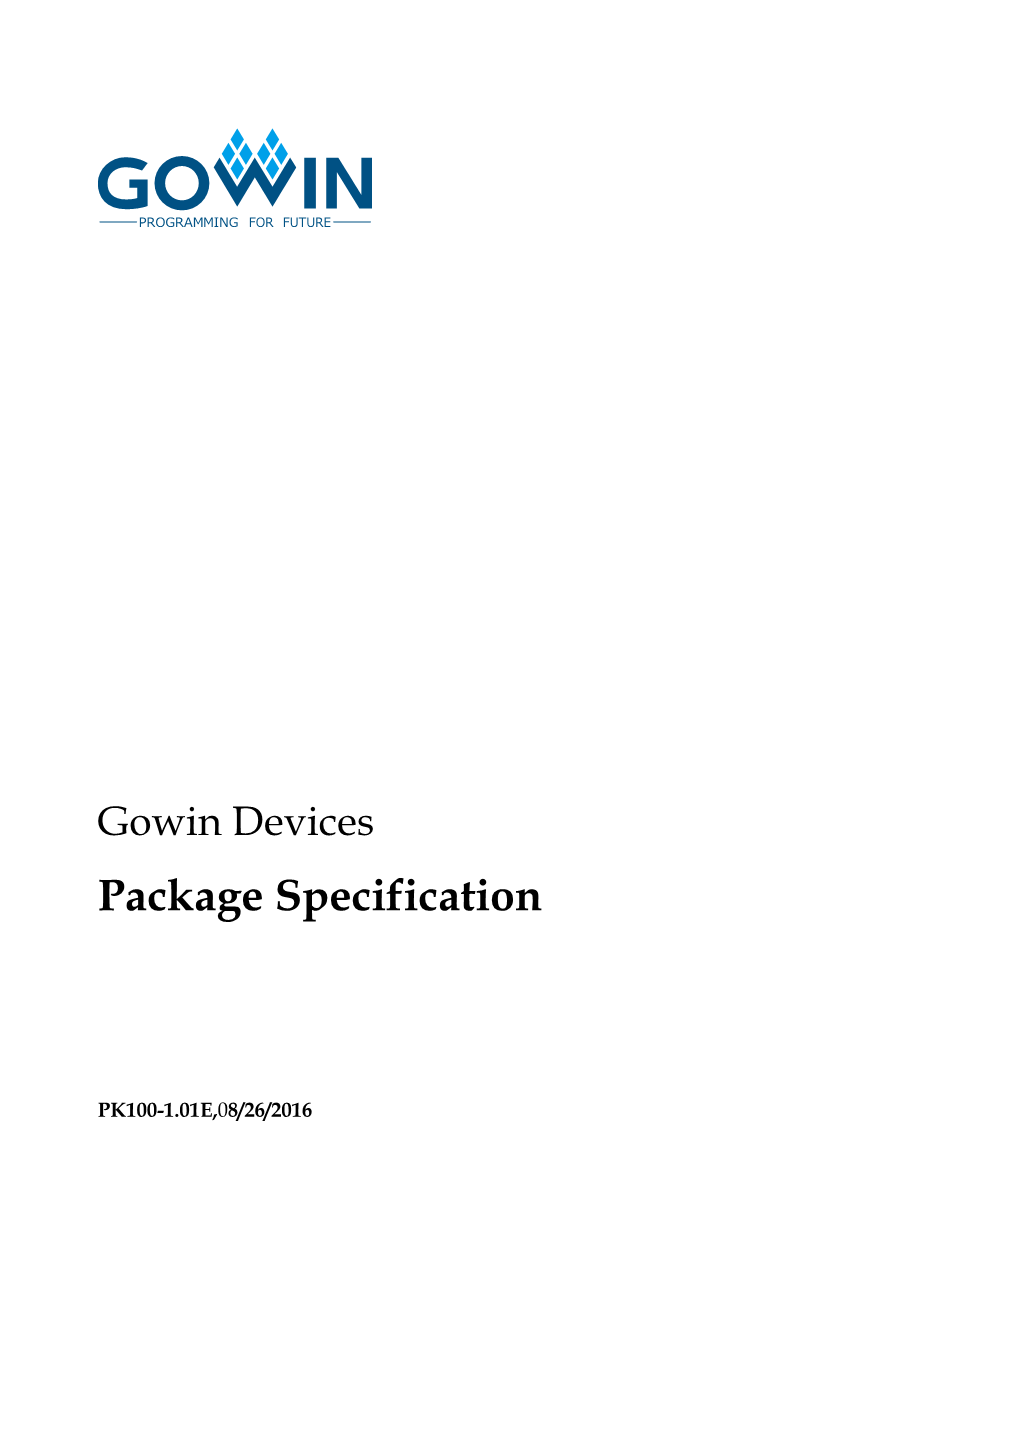 Package Specification